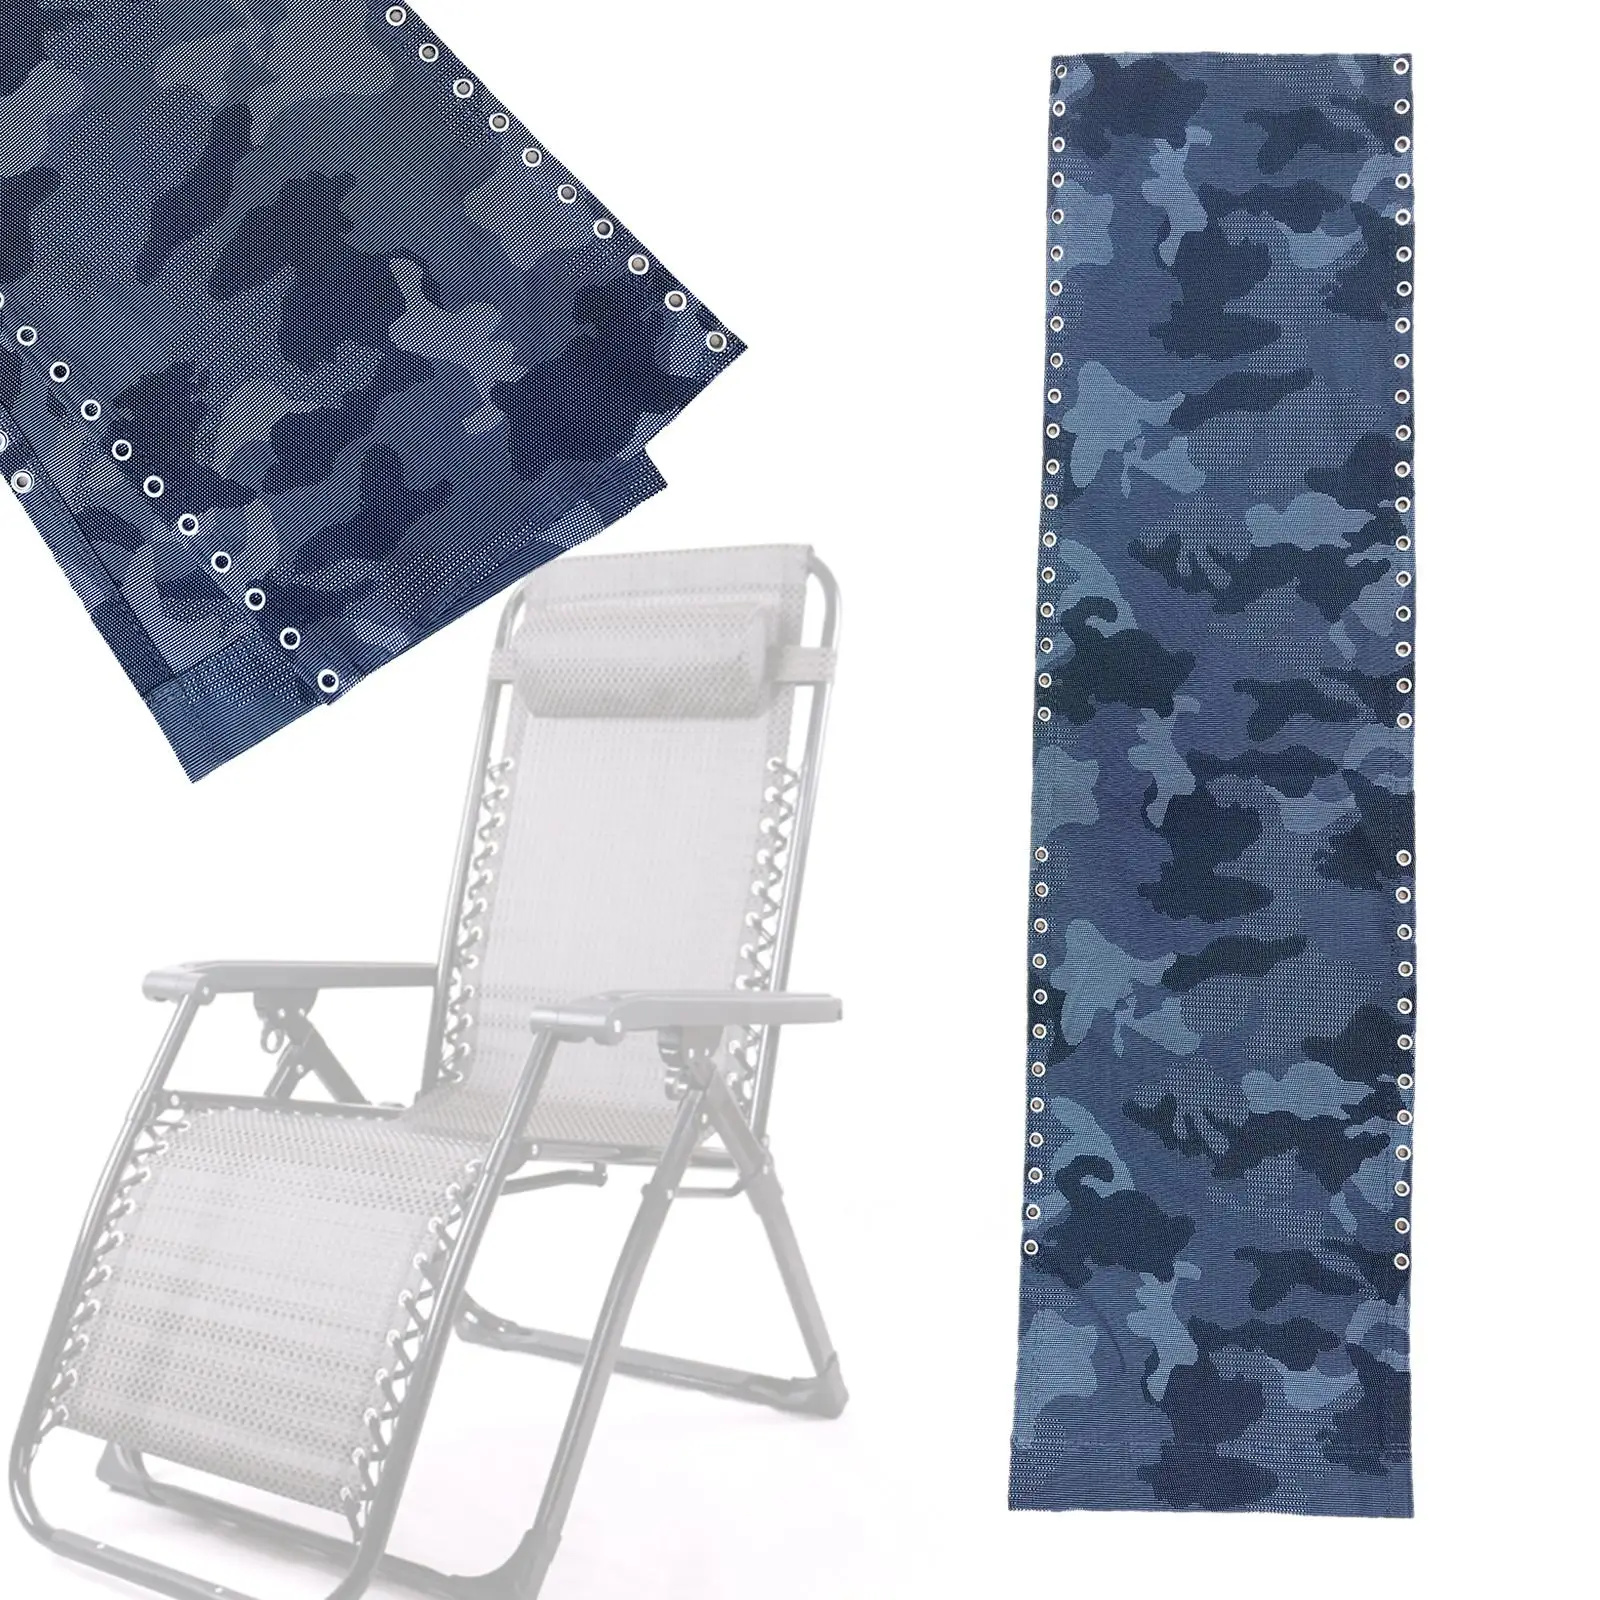 Durable Recliner Cloth Chair Replacement Fabric Replacement Chair Cloth Lounge Chair Cloth for Outdoor Camping Beach Recliners